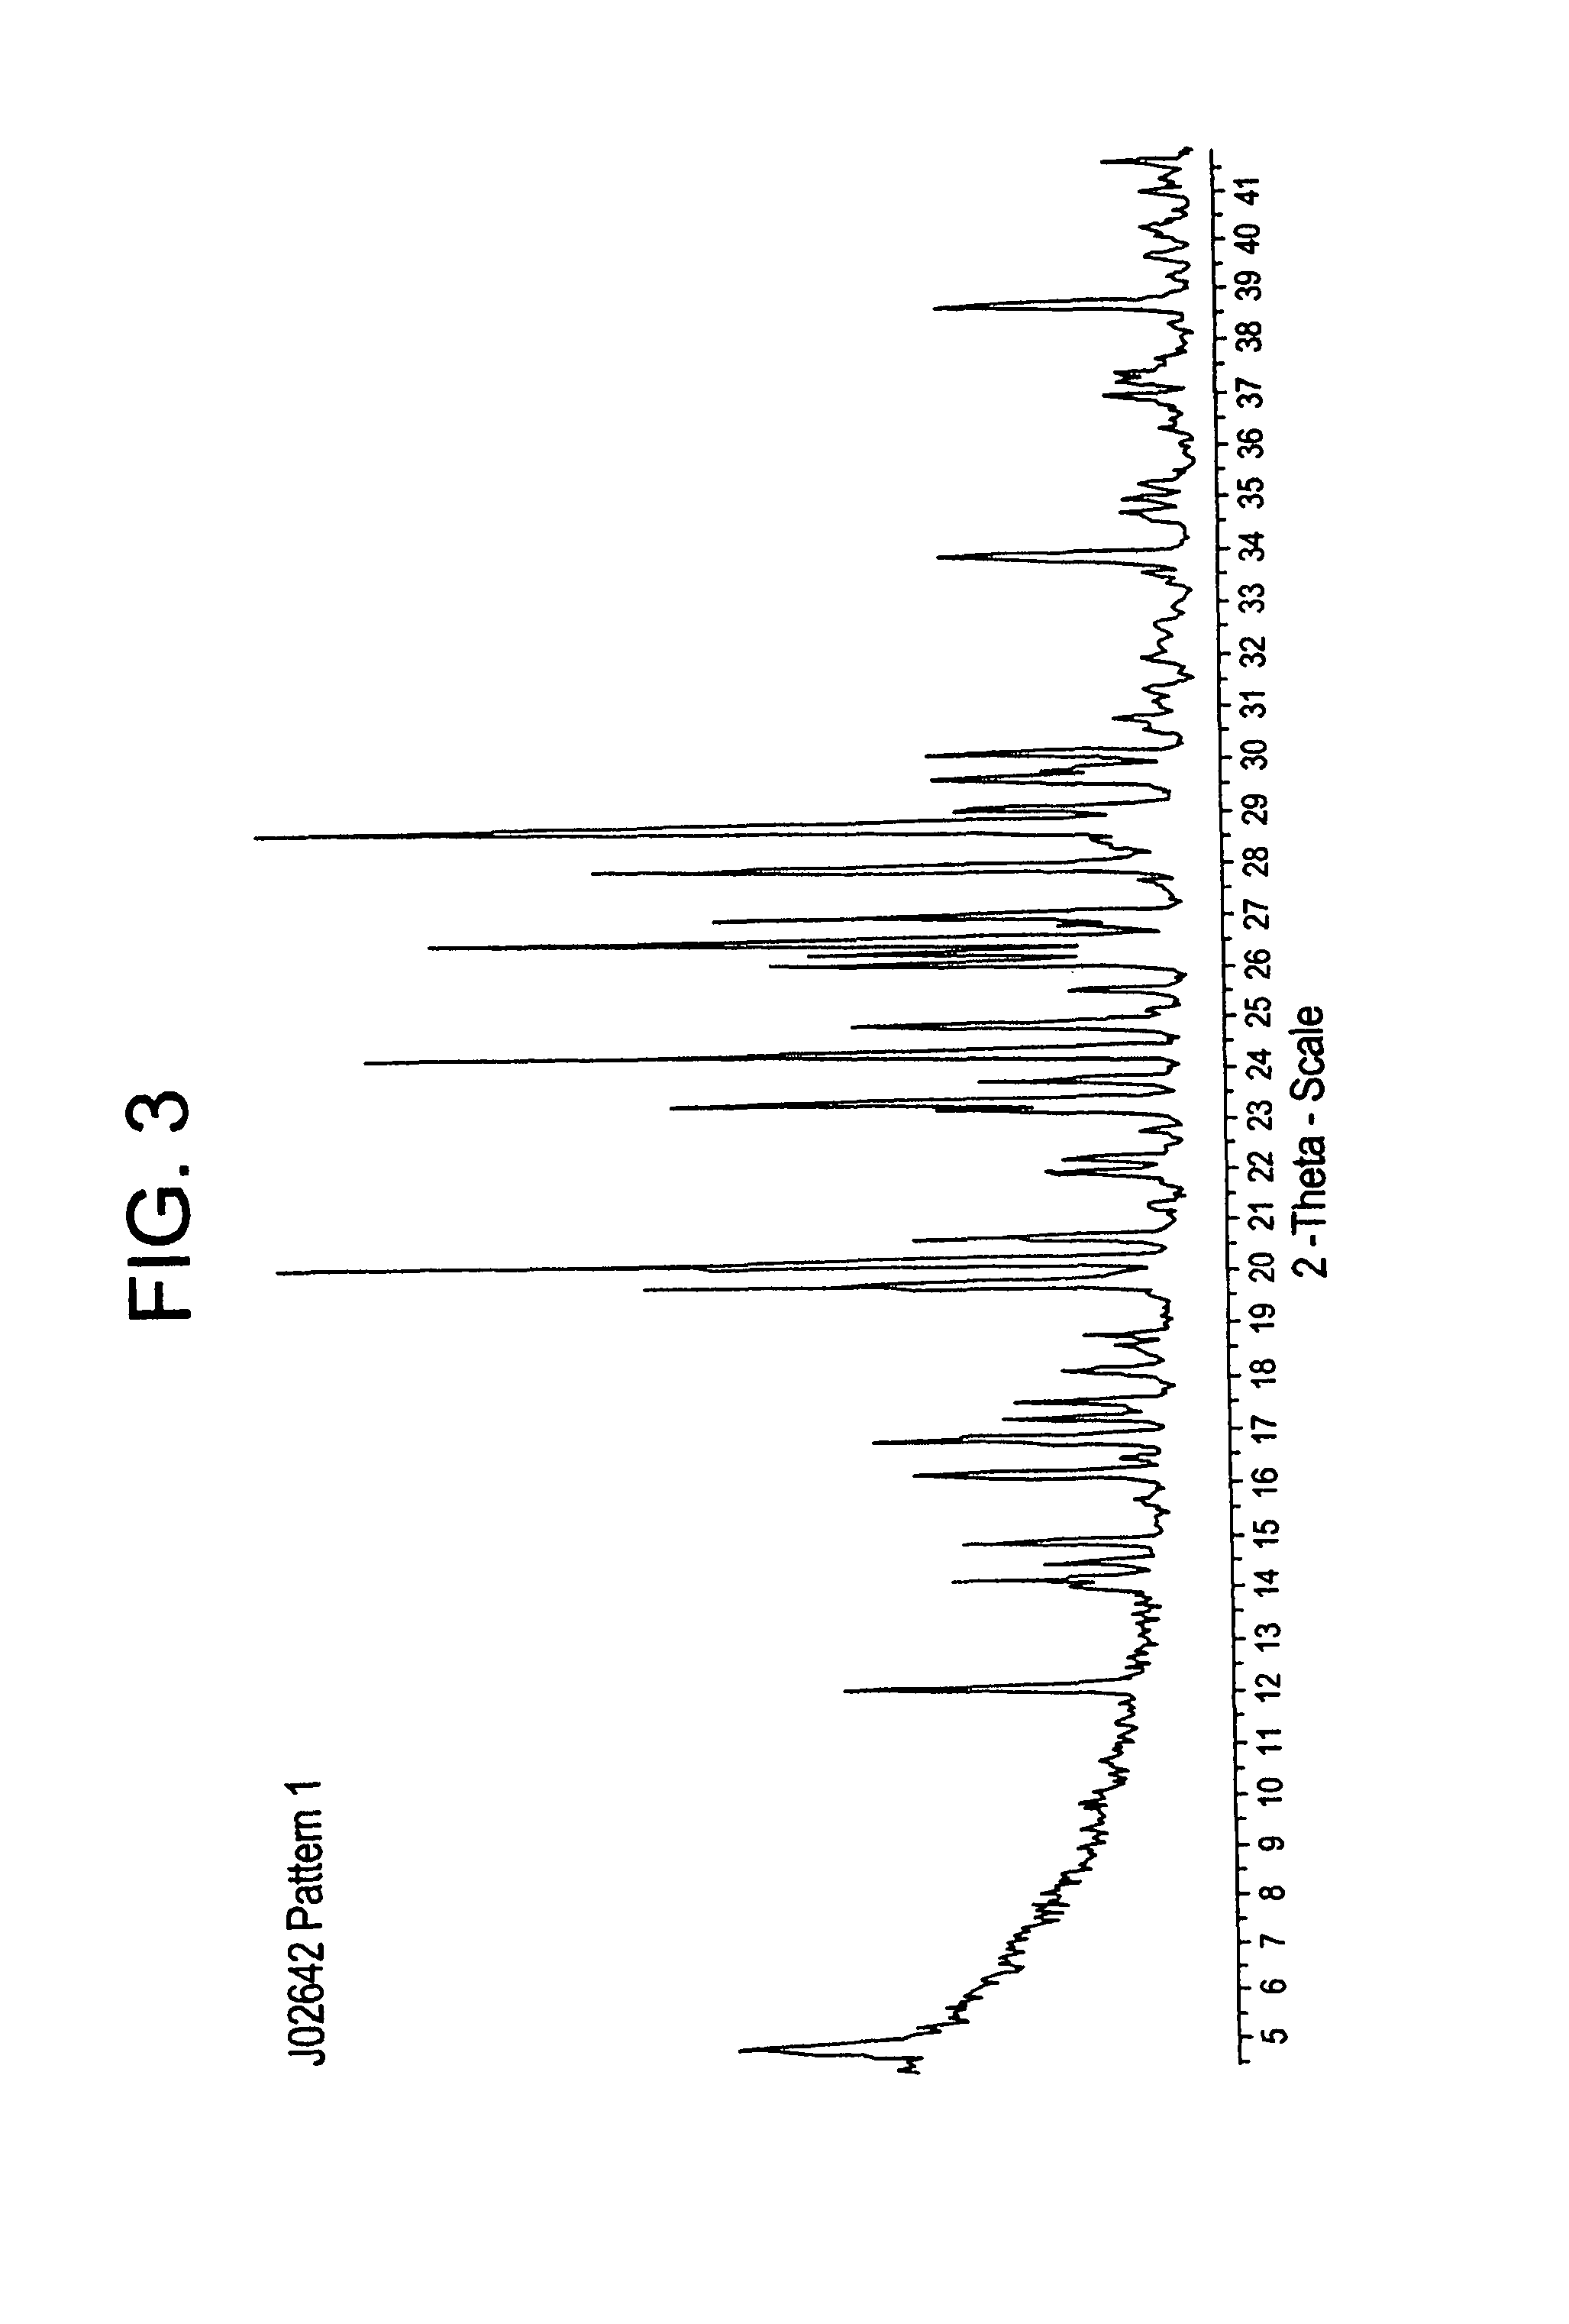 Compositions and processes for preparing 5-amino or substituted amino 1,2,3-triazoles and triazole orotate formulations